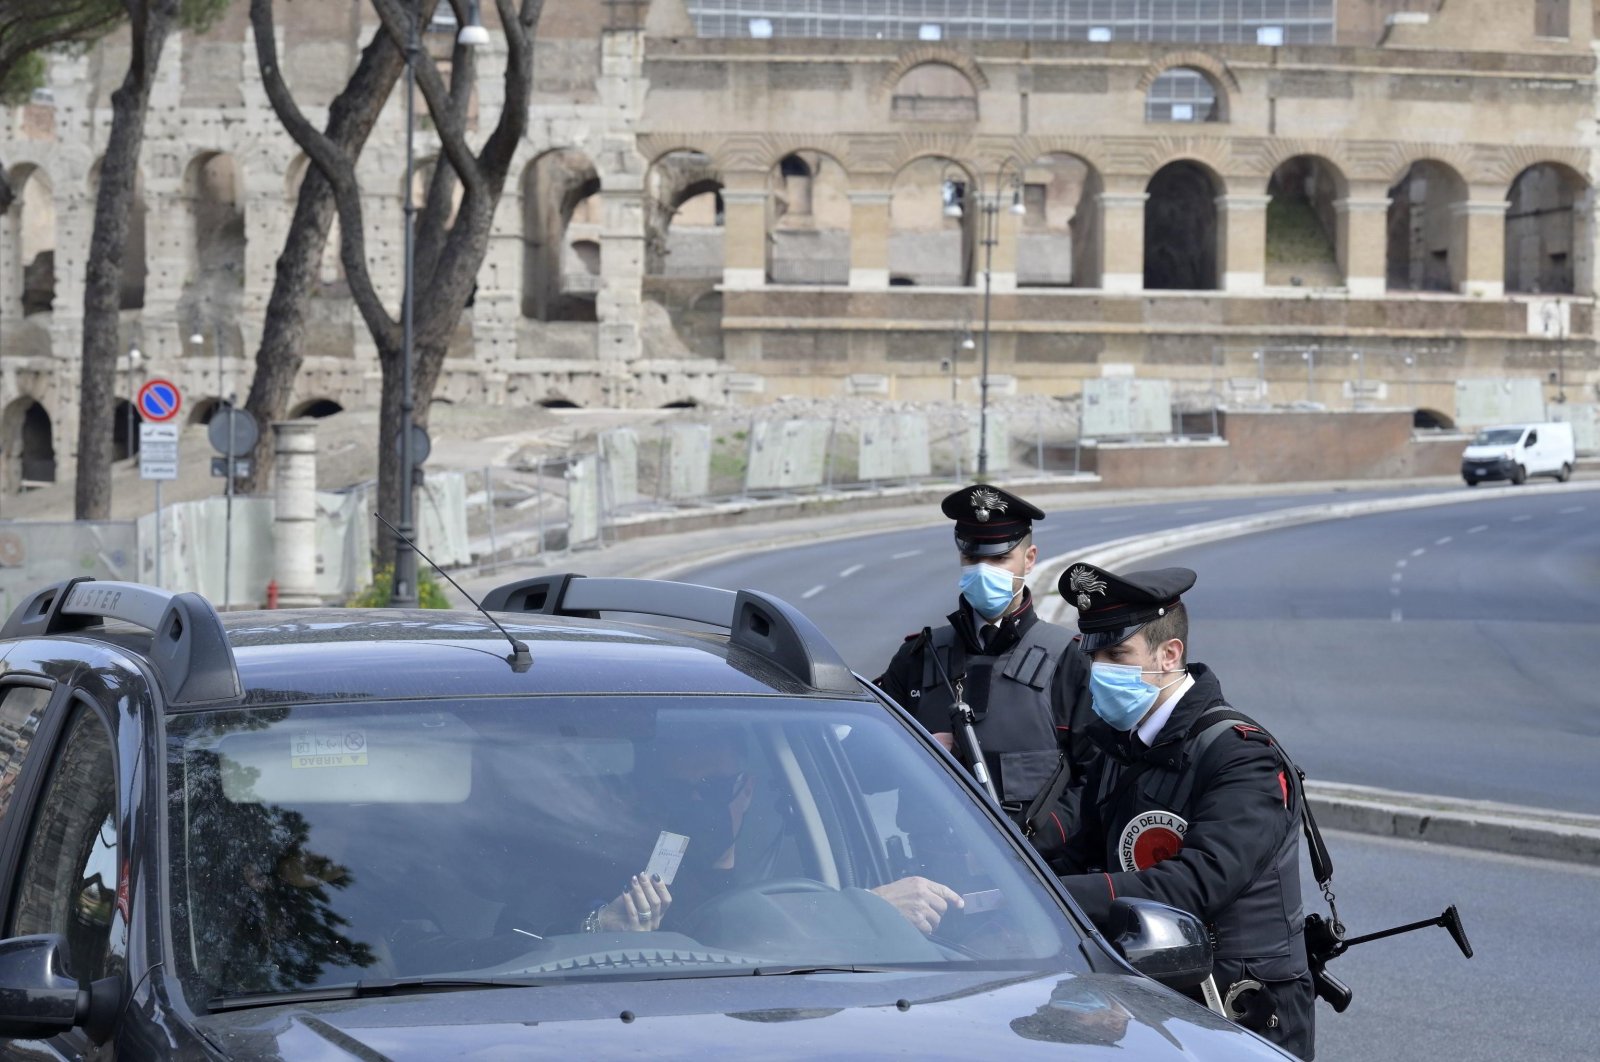 Checkpoint and Carabinieri patrols near the Colosseum on the first day of the "red zone" in Rome, Italy, April 3, 2021. (EPA Photo)